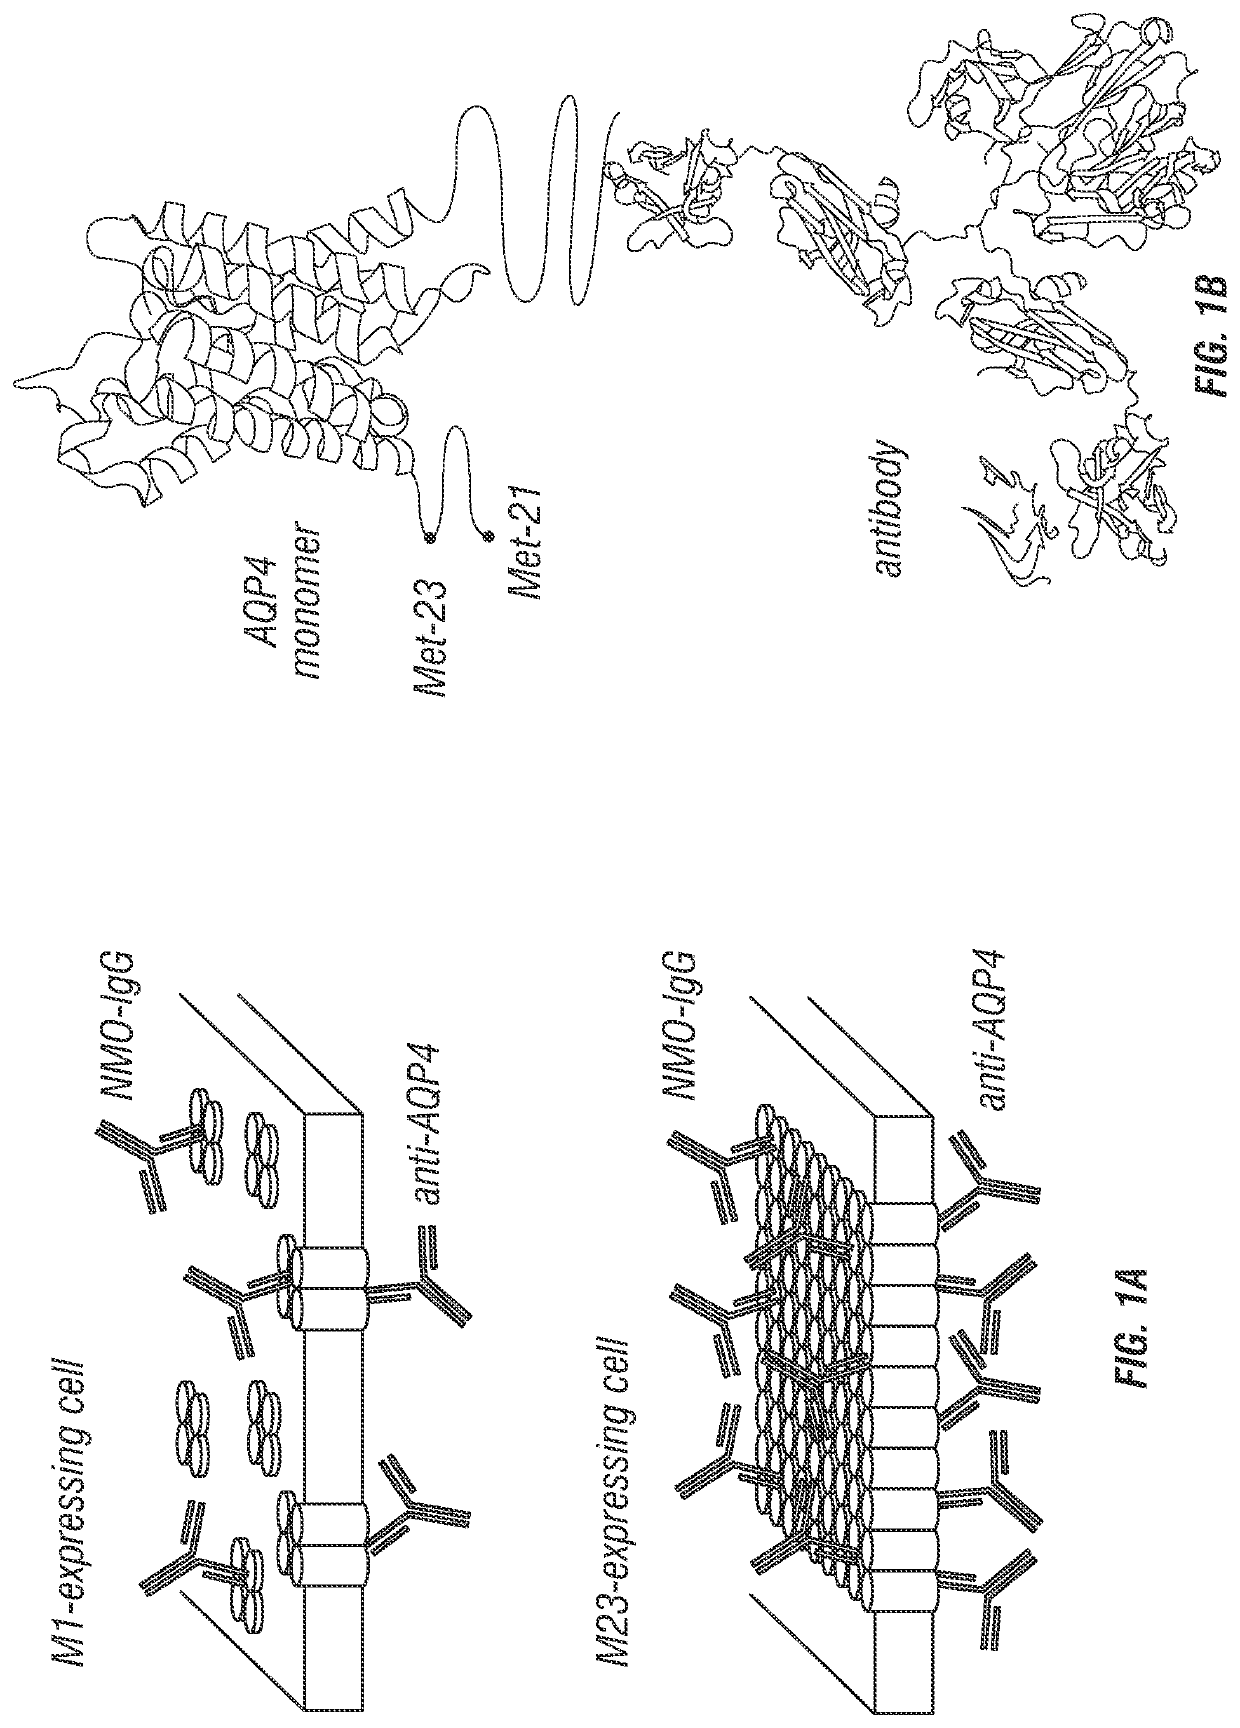 Compositions and methods for the treatment of neuromyelitis optica